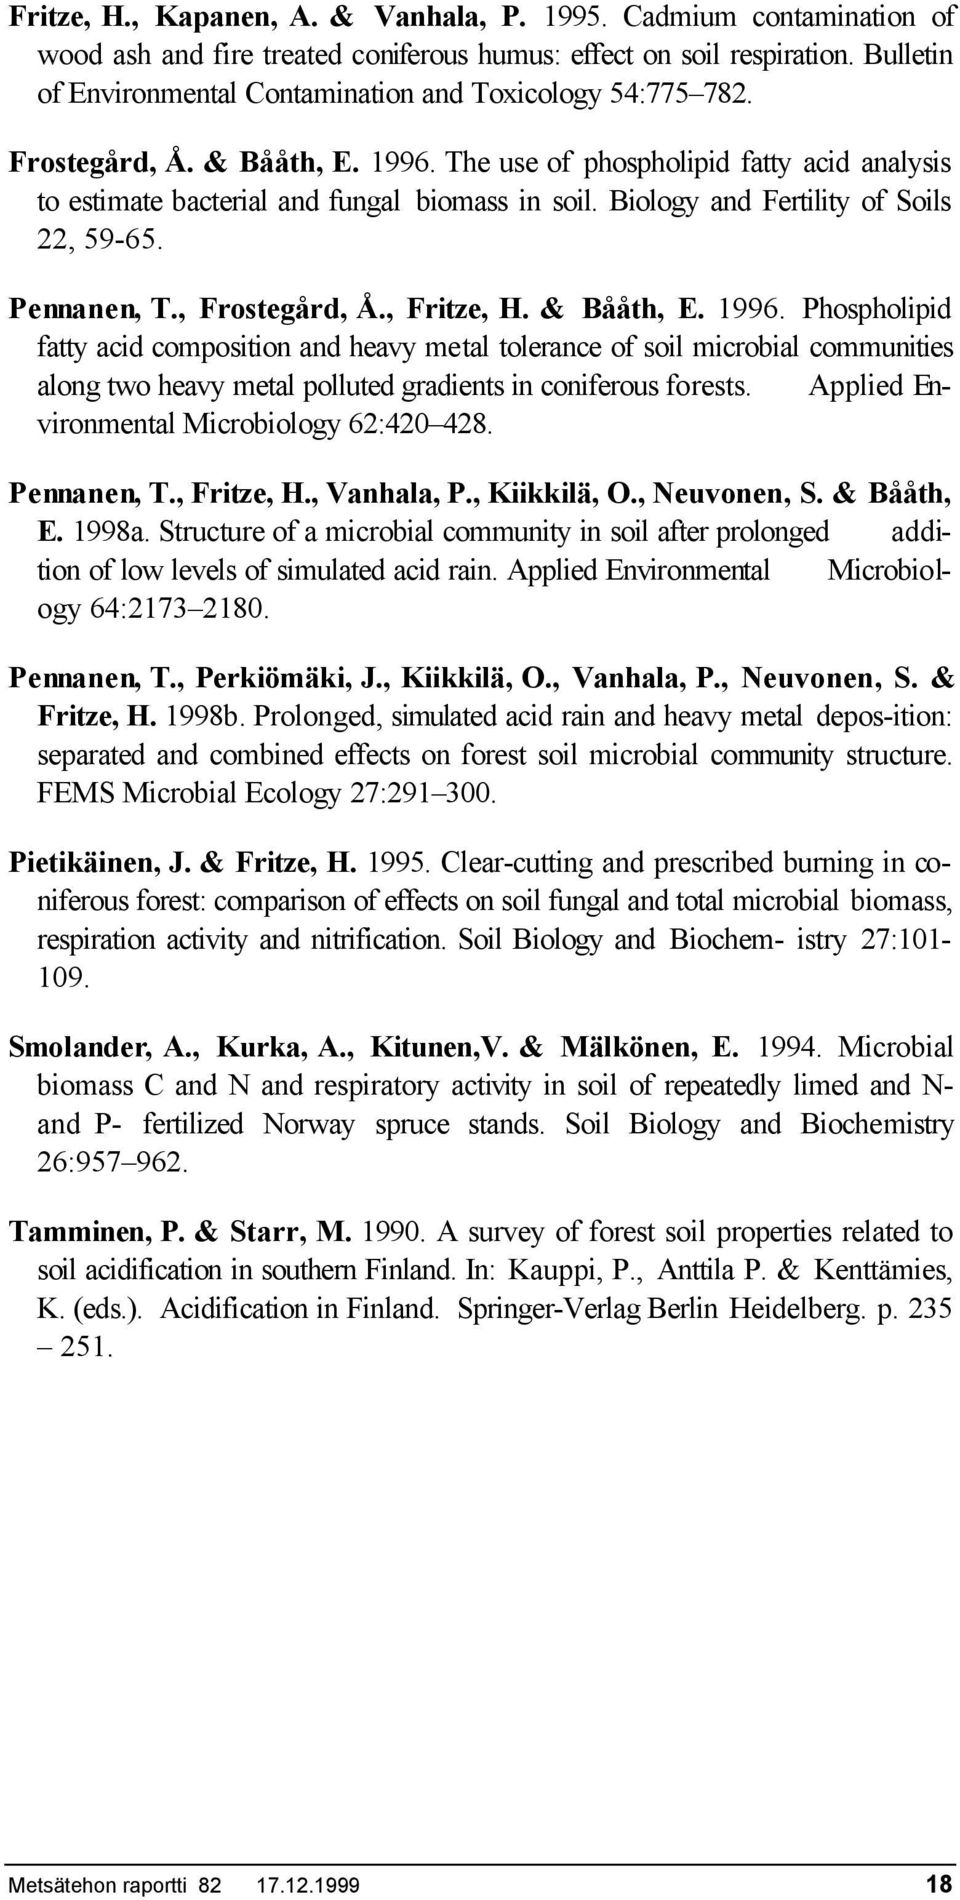 & Bååth, E. 1996. Phospholipid ftty cid composition nd hevy metl tolernce of soil microbil communities long two hevy metl polluted grdients in coniferous forests.